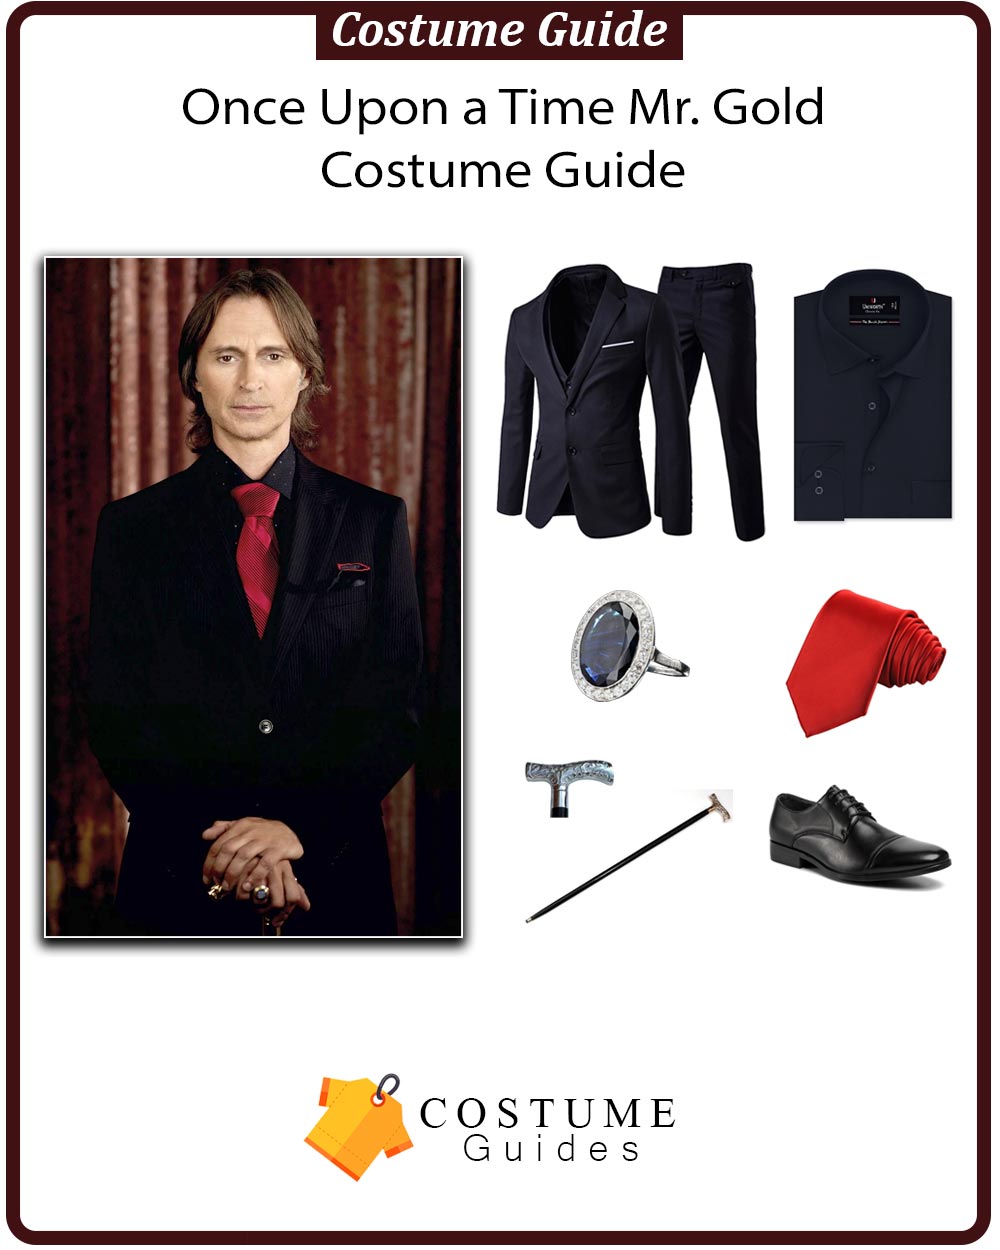 robert-carlyle-once-upon-a-time-mr-gold-costume